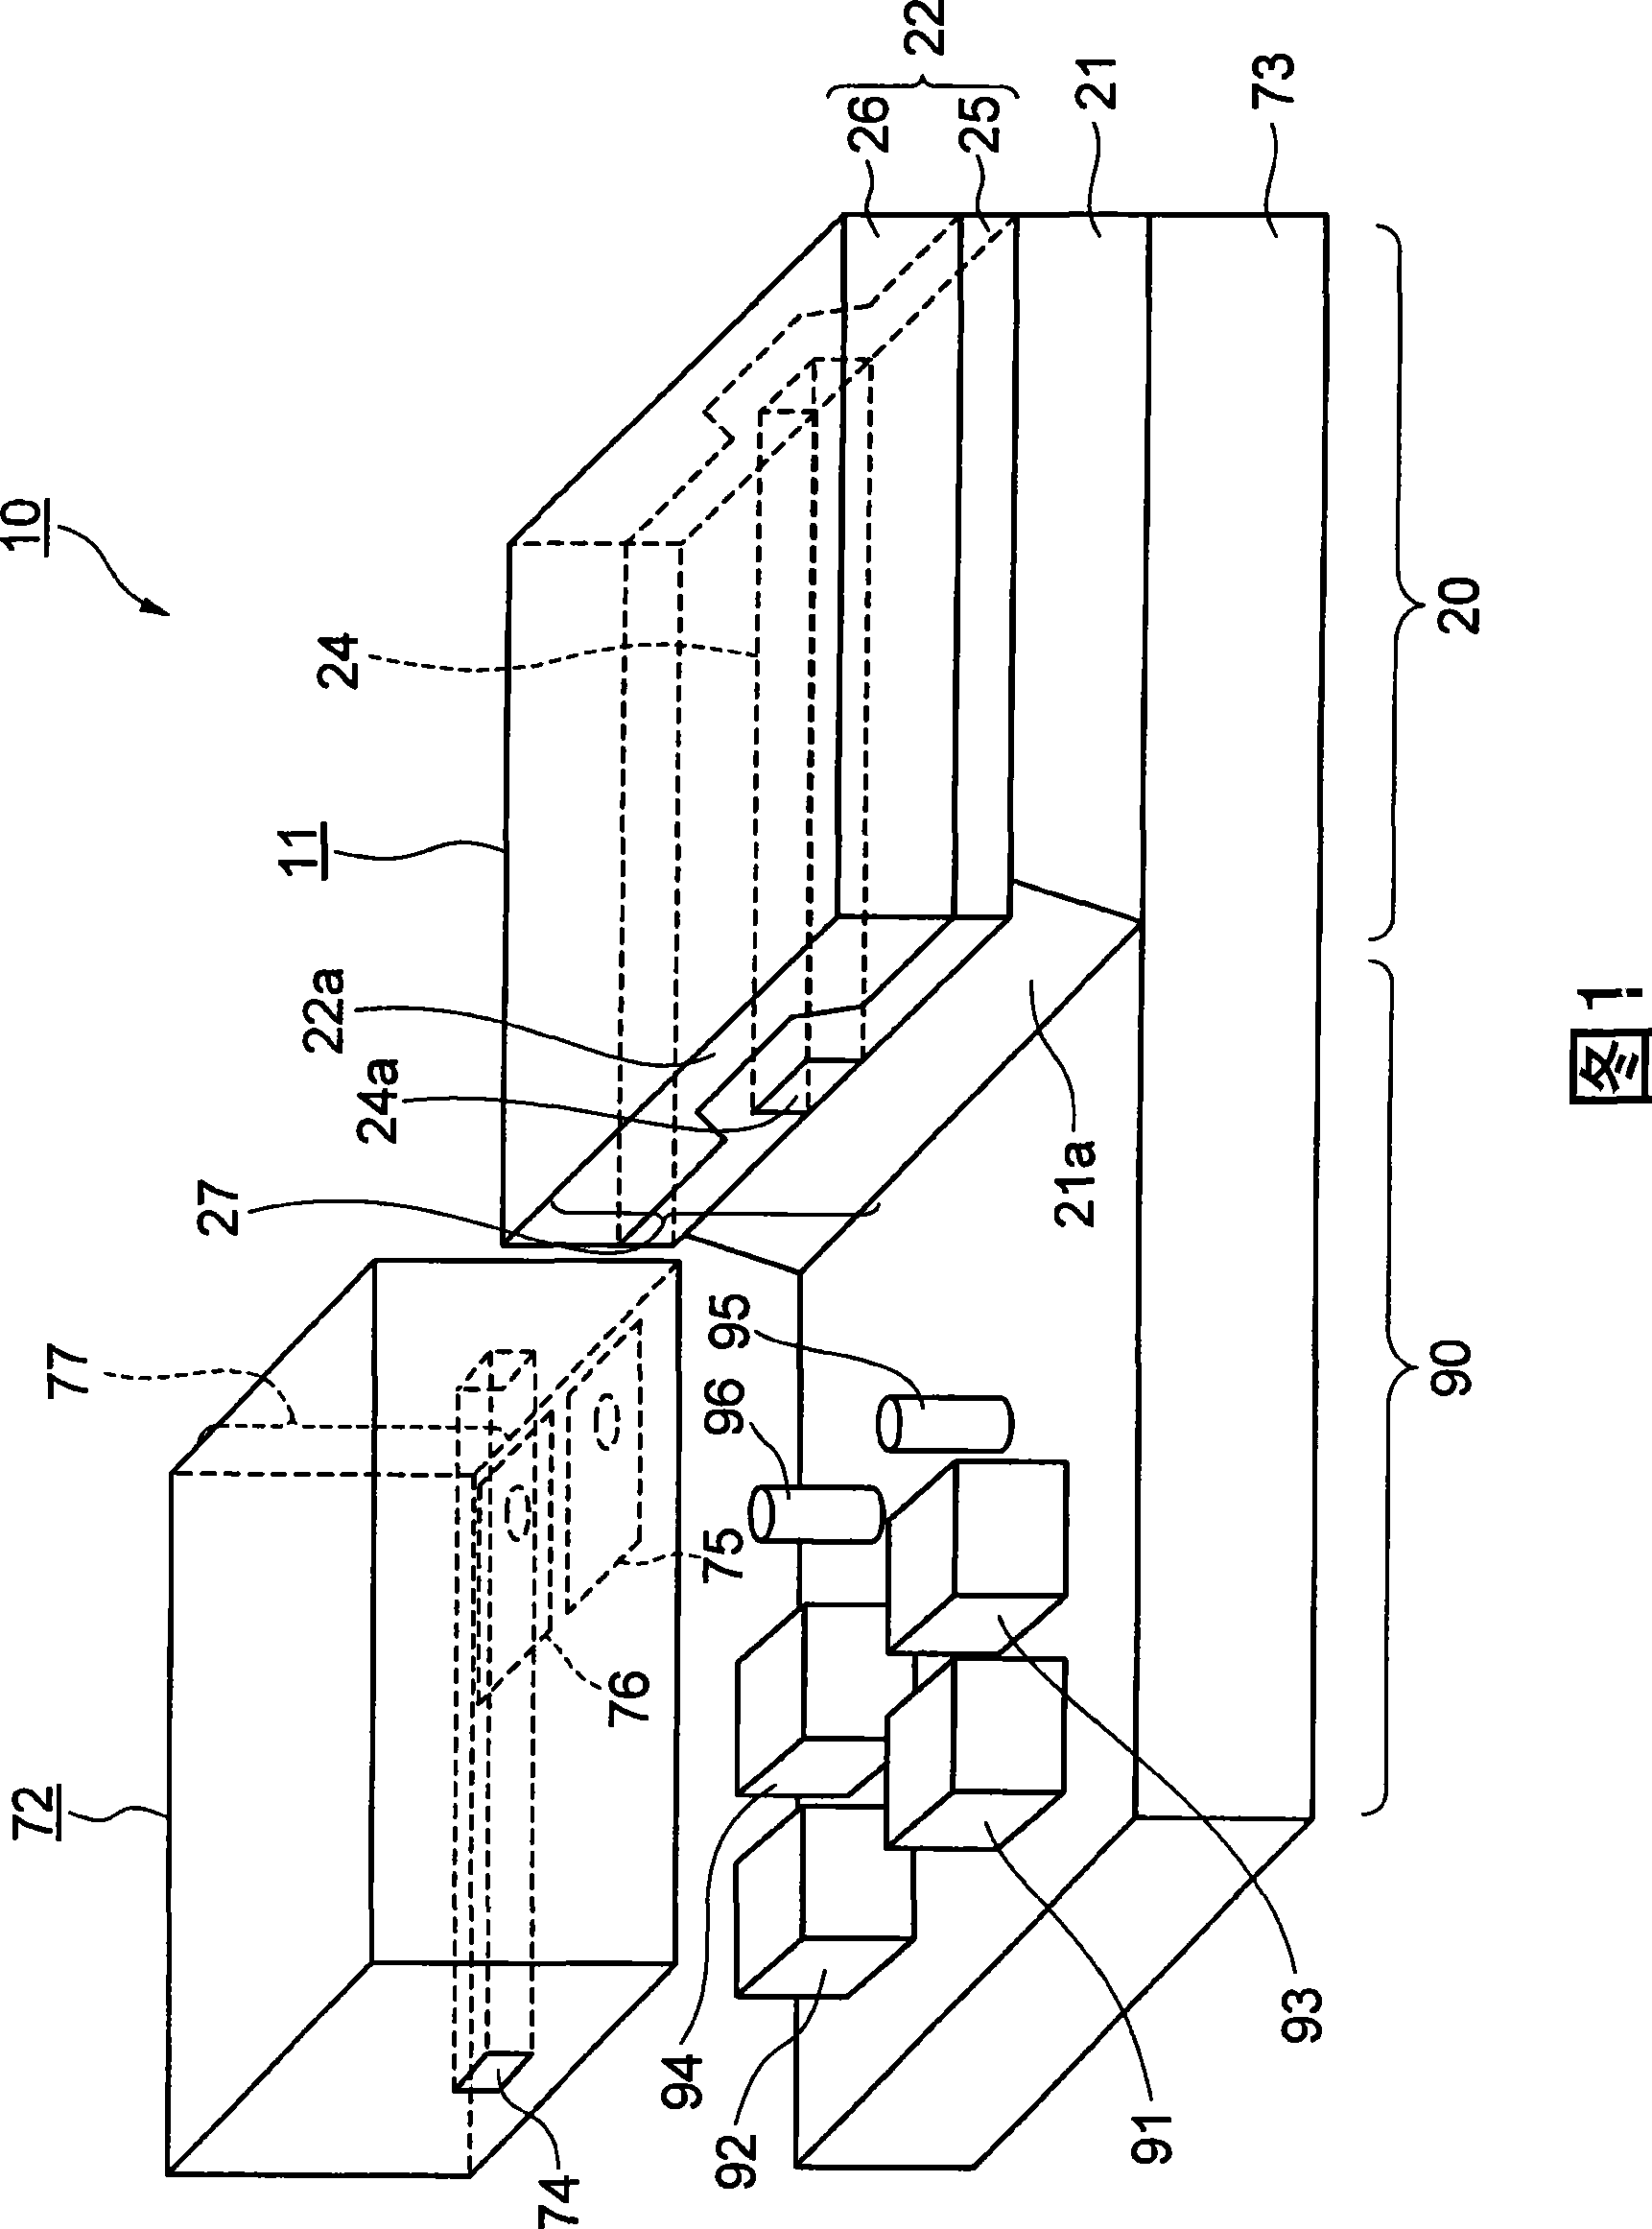 Planar lightwave circuit, manufacturing method thereof, and light waveguide device